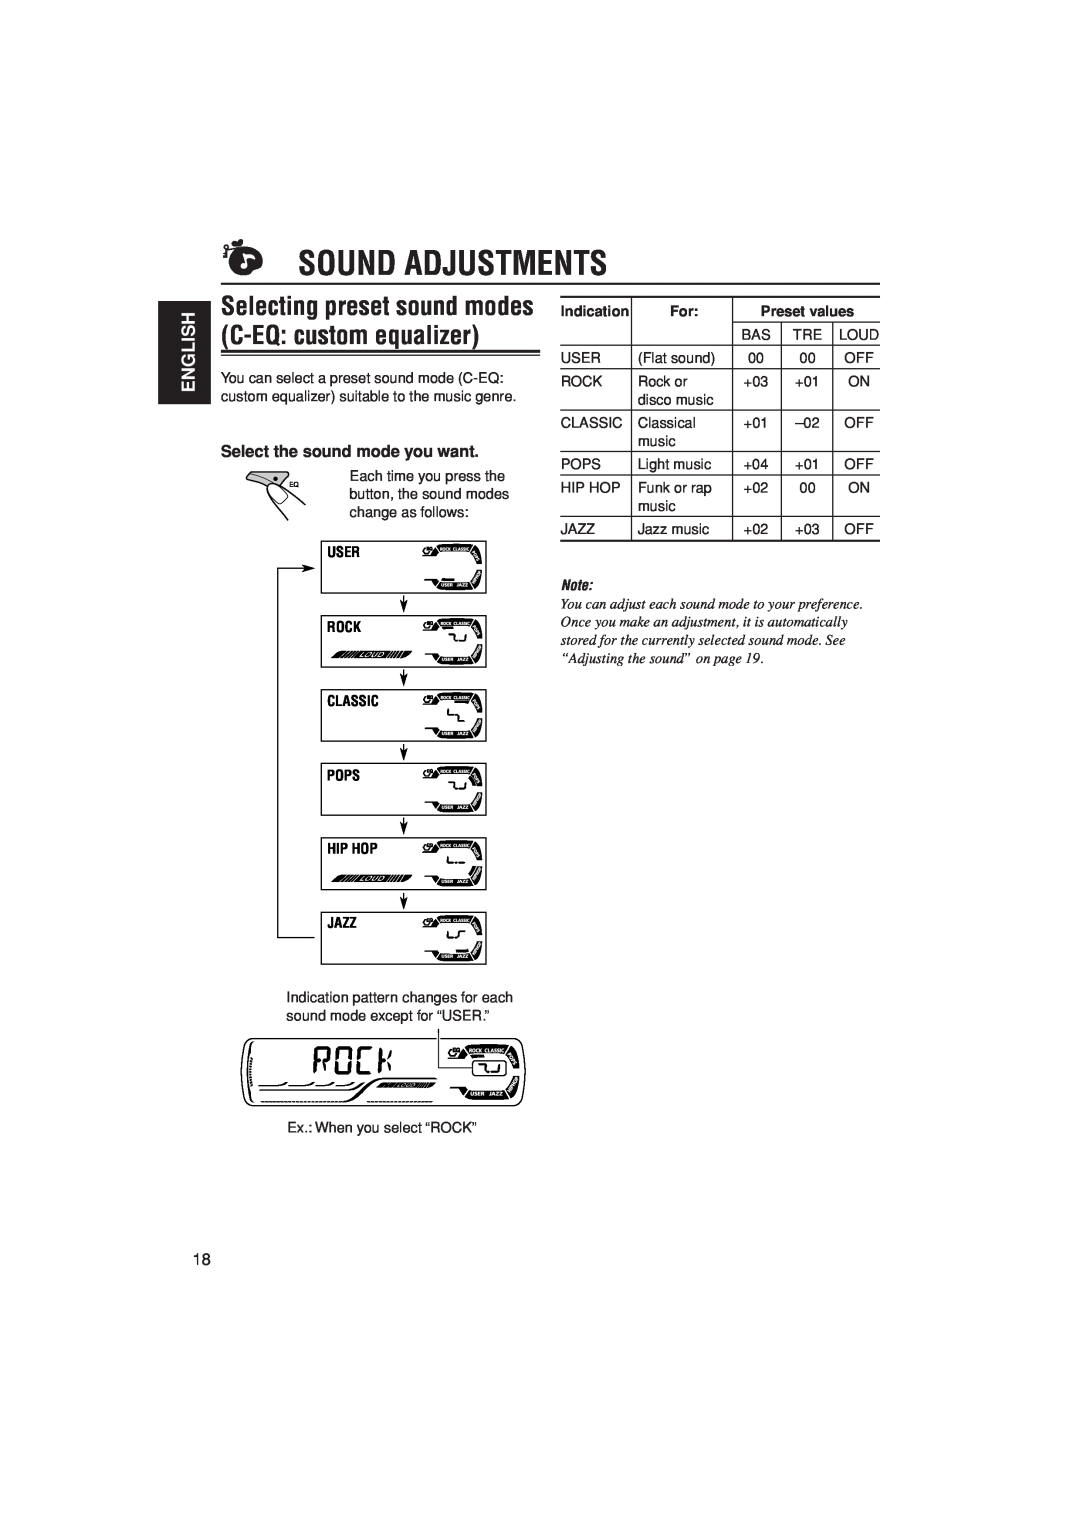 JVC KD-G305 manual Sound Adjustments, English, Select the sound mode you want, User Rock, Preset values 